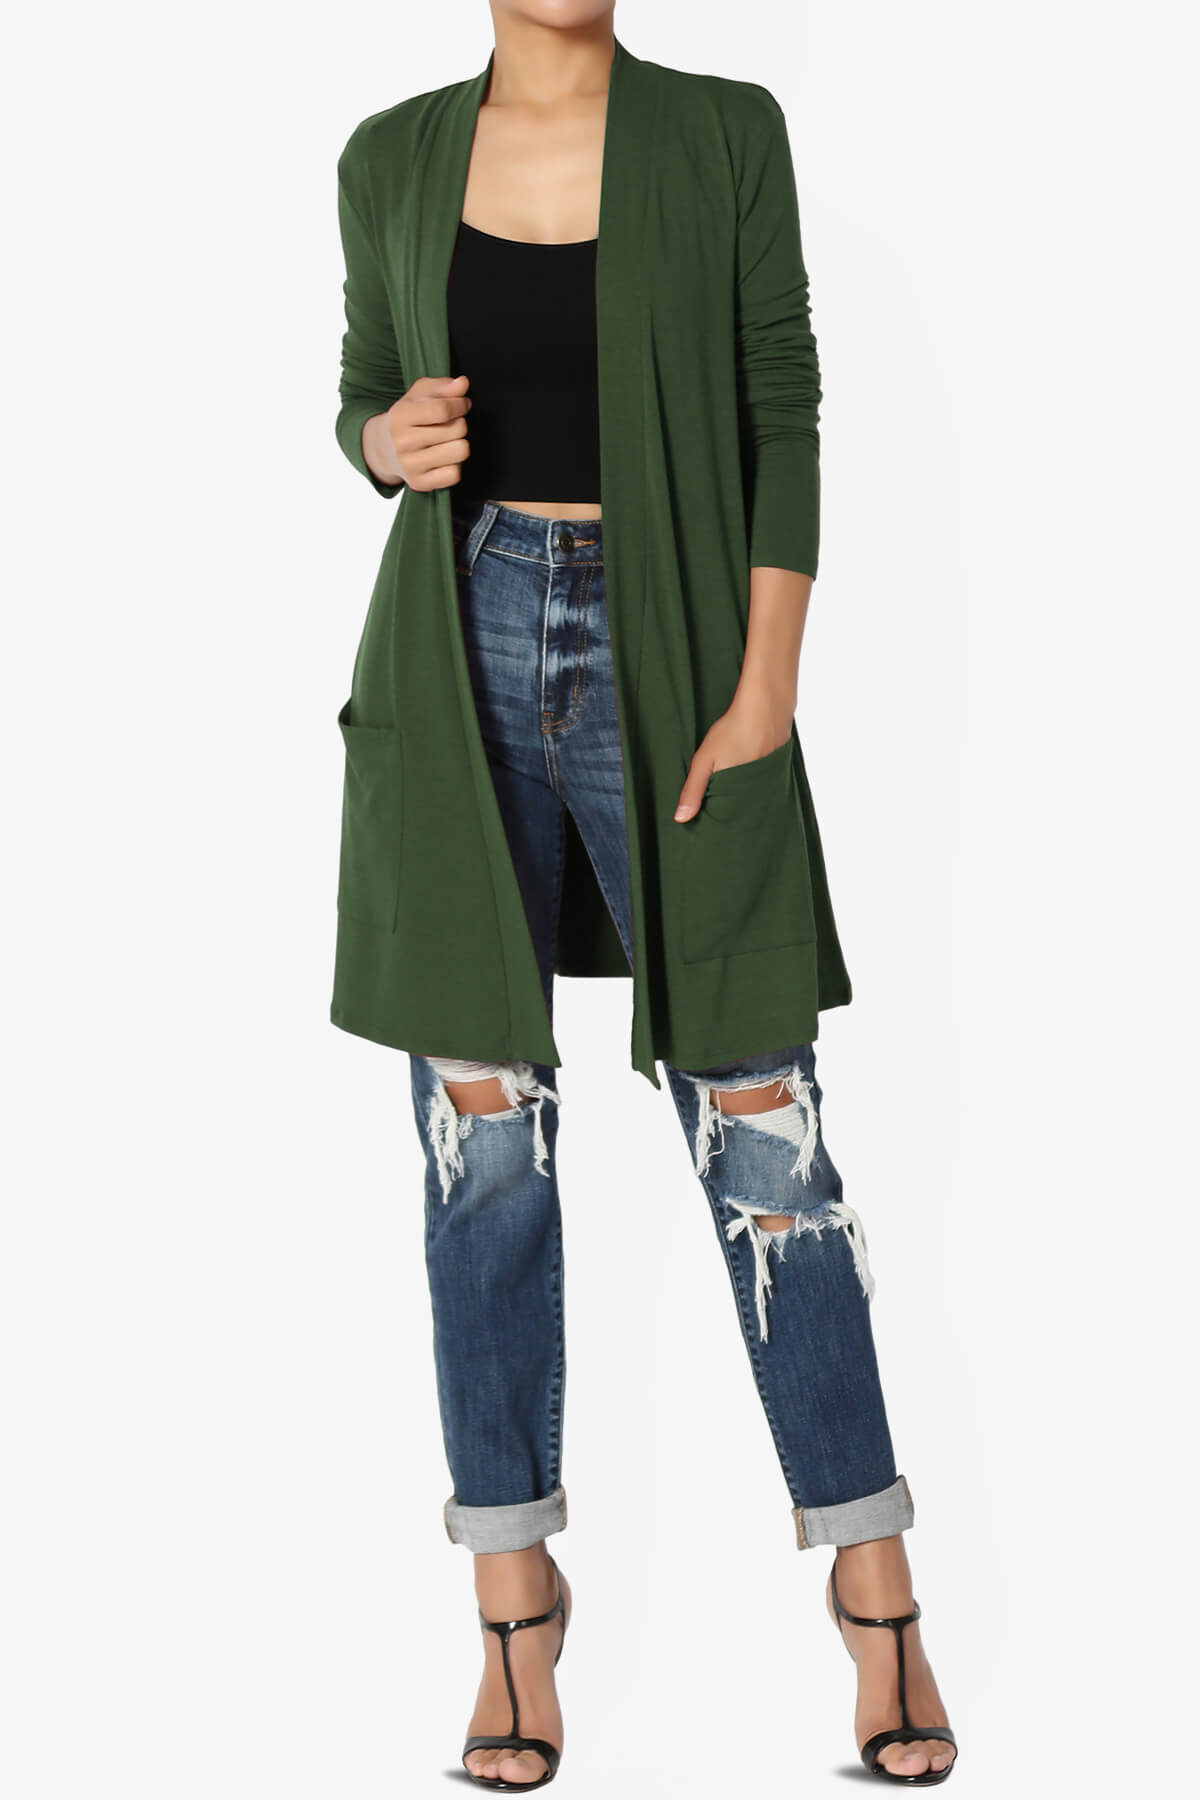 Daday Long Sleeve Pocket Open Front Cardigan ARMY GREEN_6